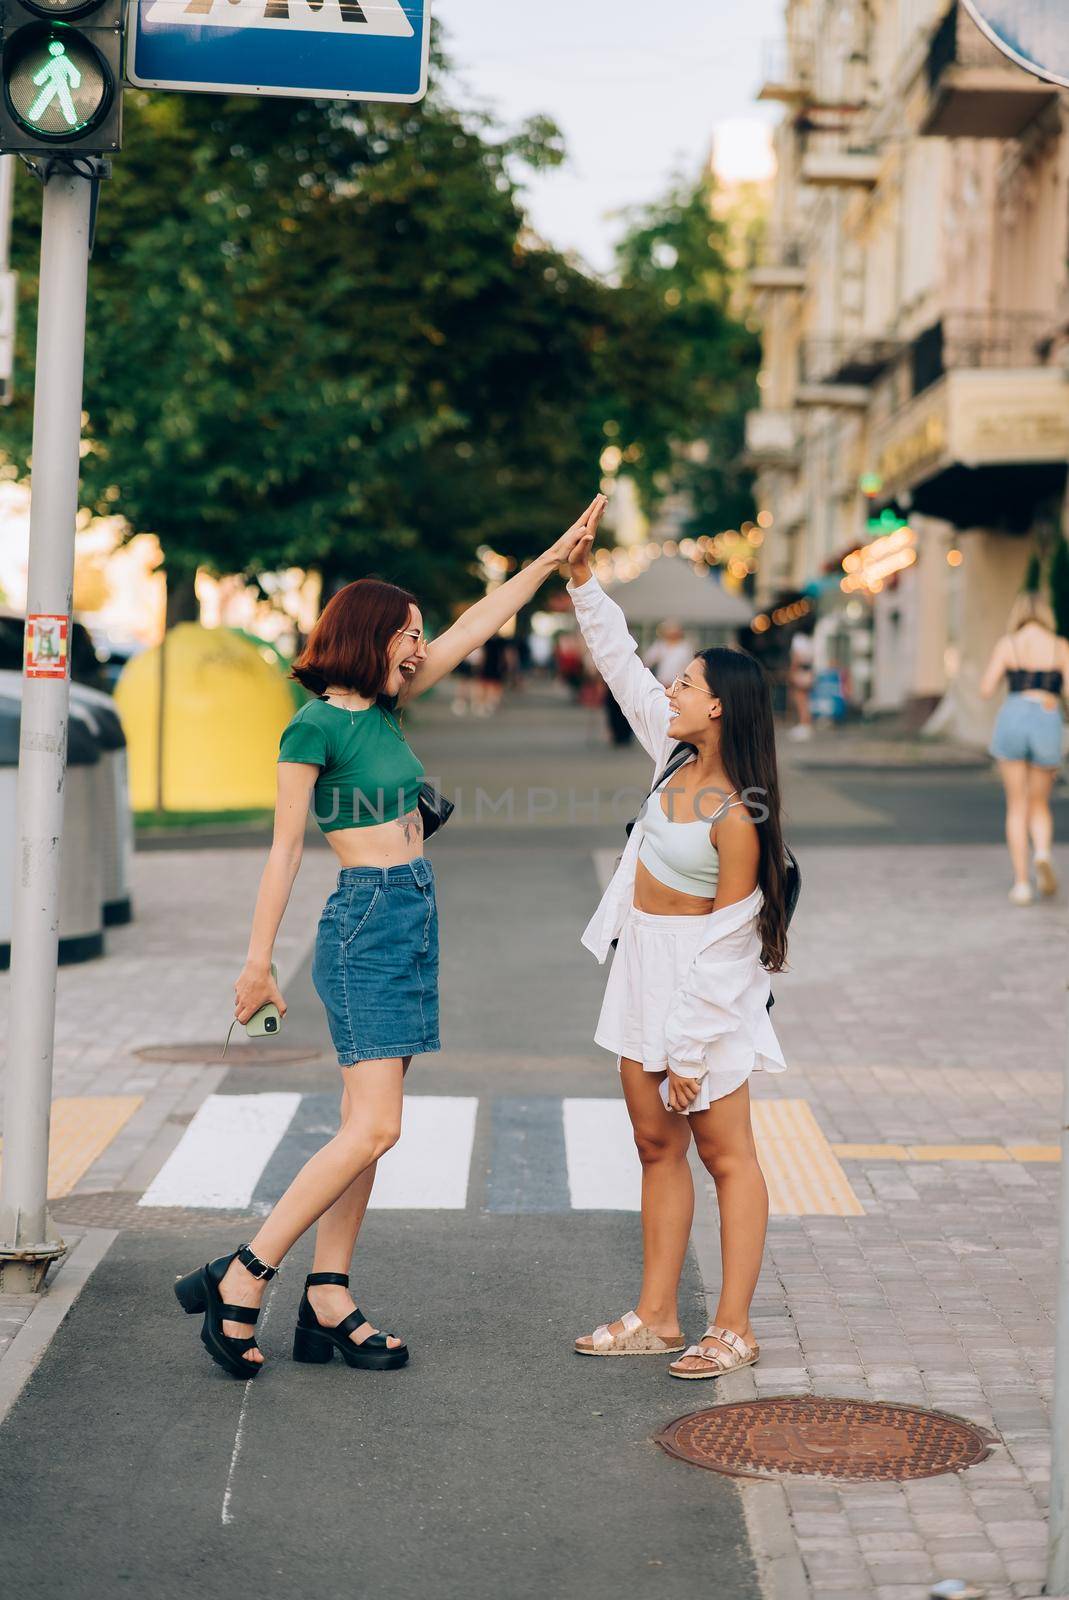 Two University students high five to teach others after successful work together